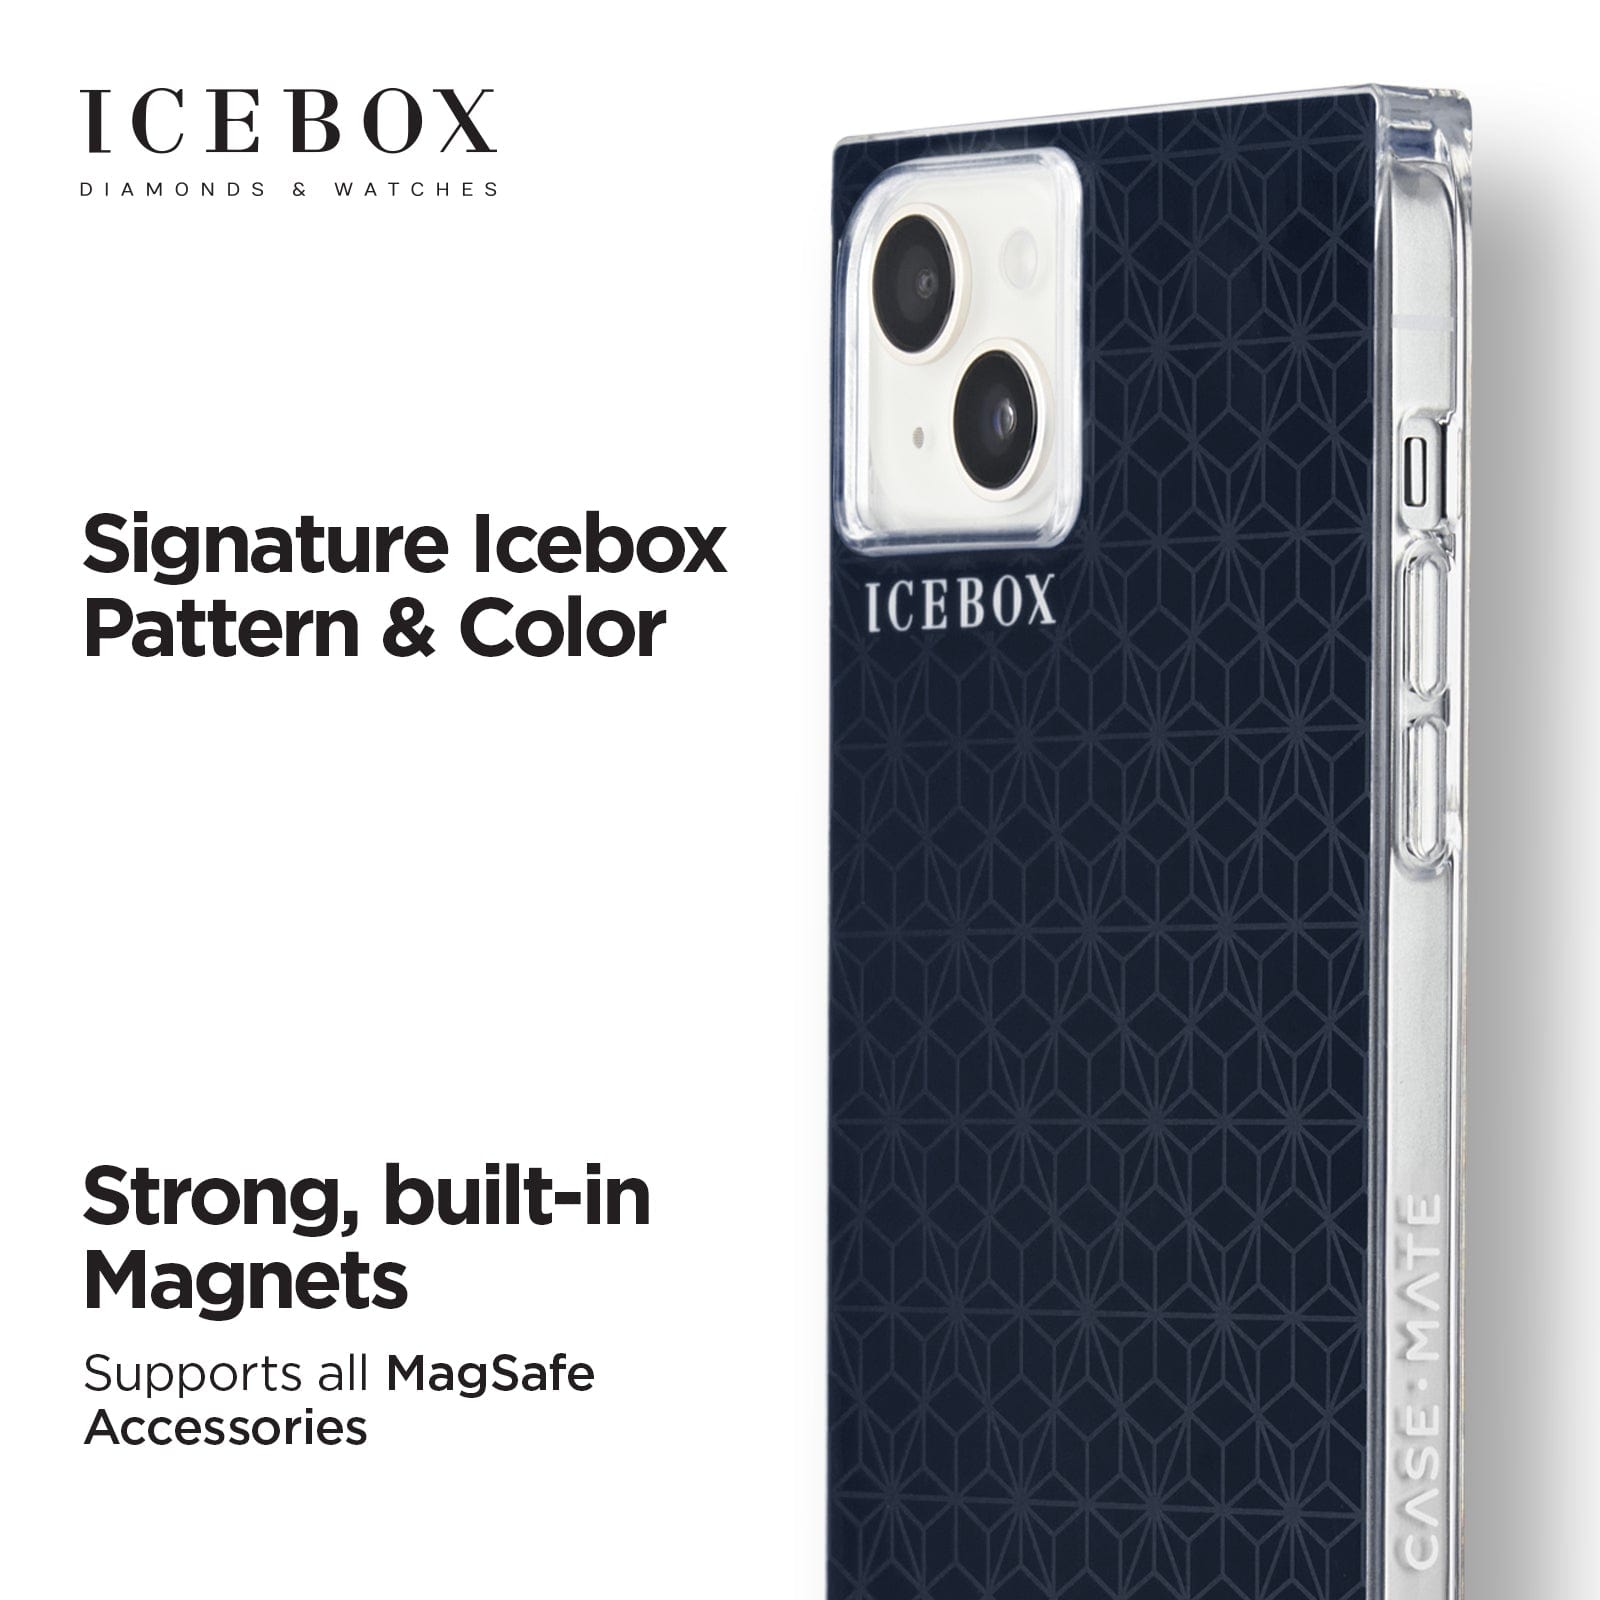 SIGNATURE ICEBOX PATTERN AND COLOR. STRONG, BUILT IN MAGNETS SUPPORTS ALL MAGSAFE ACCESSORIES